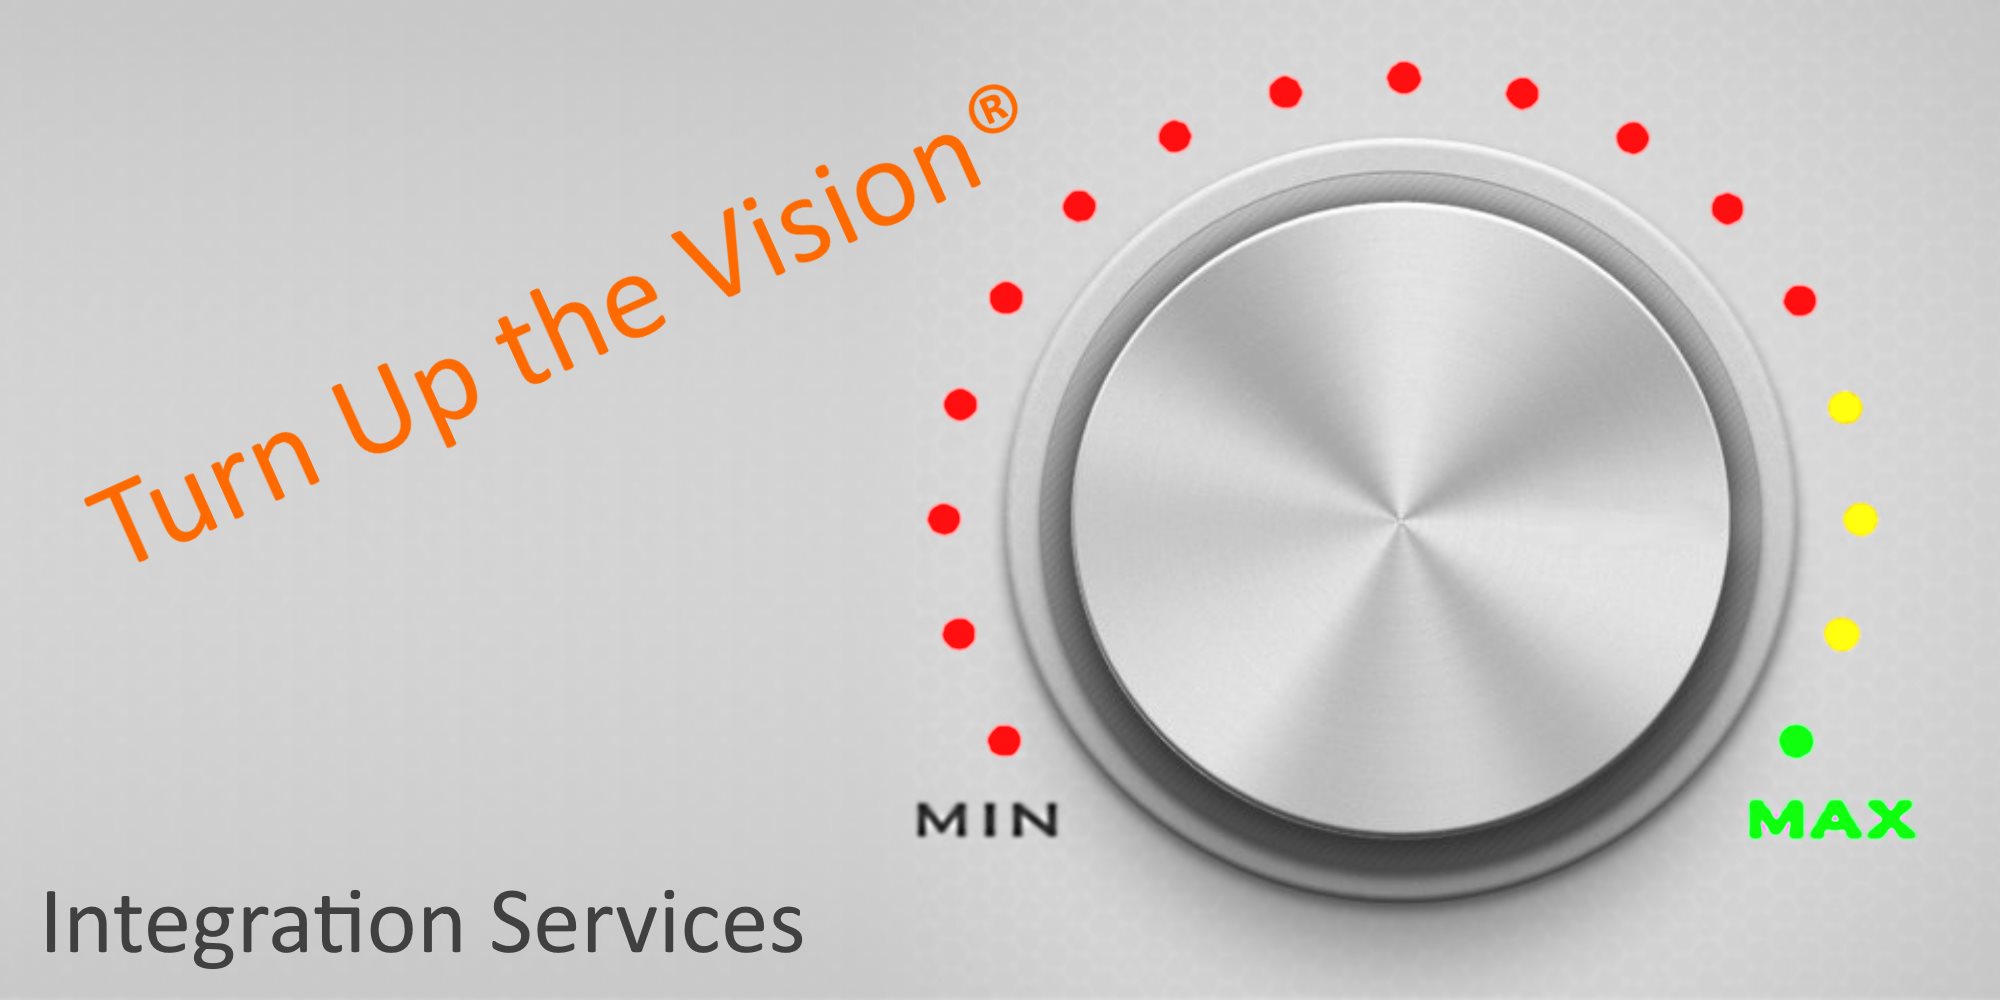 Turn Up the Vision system integration services